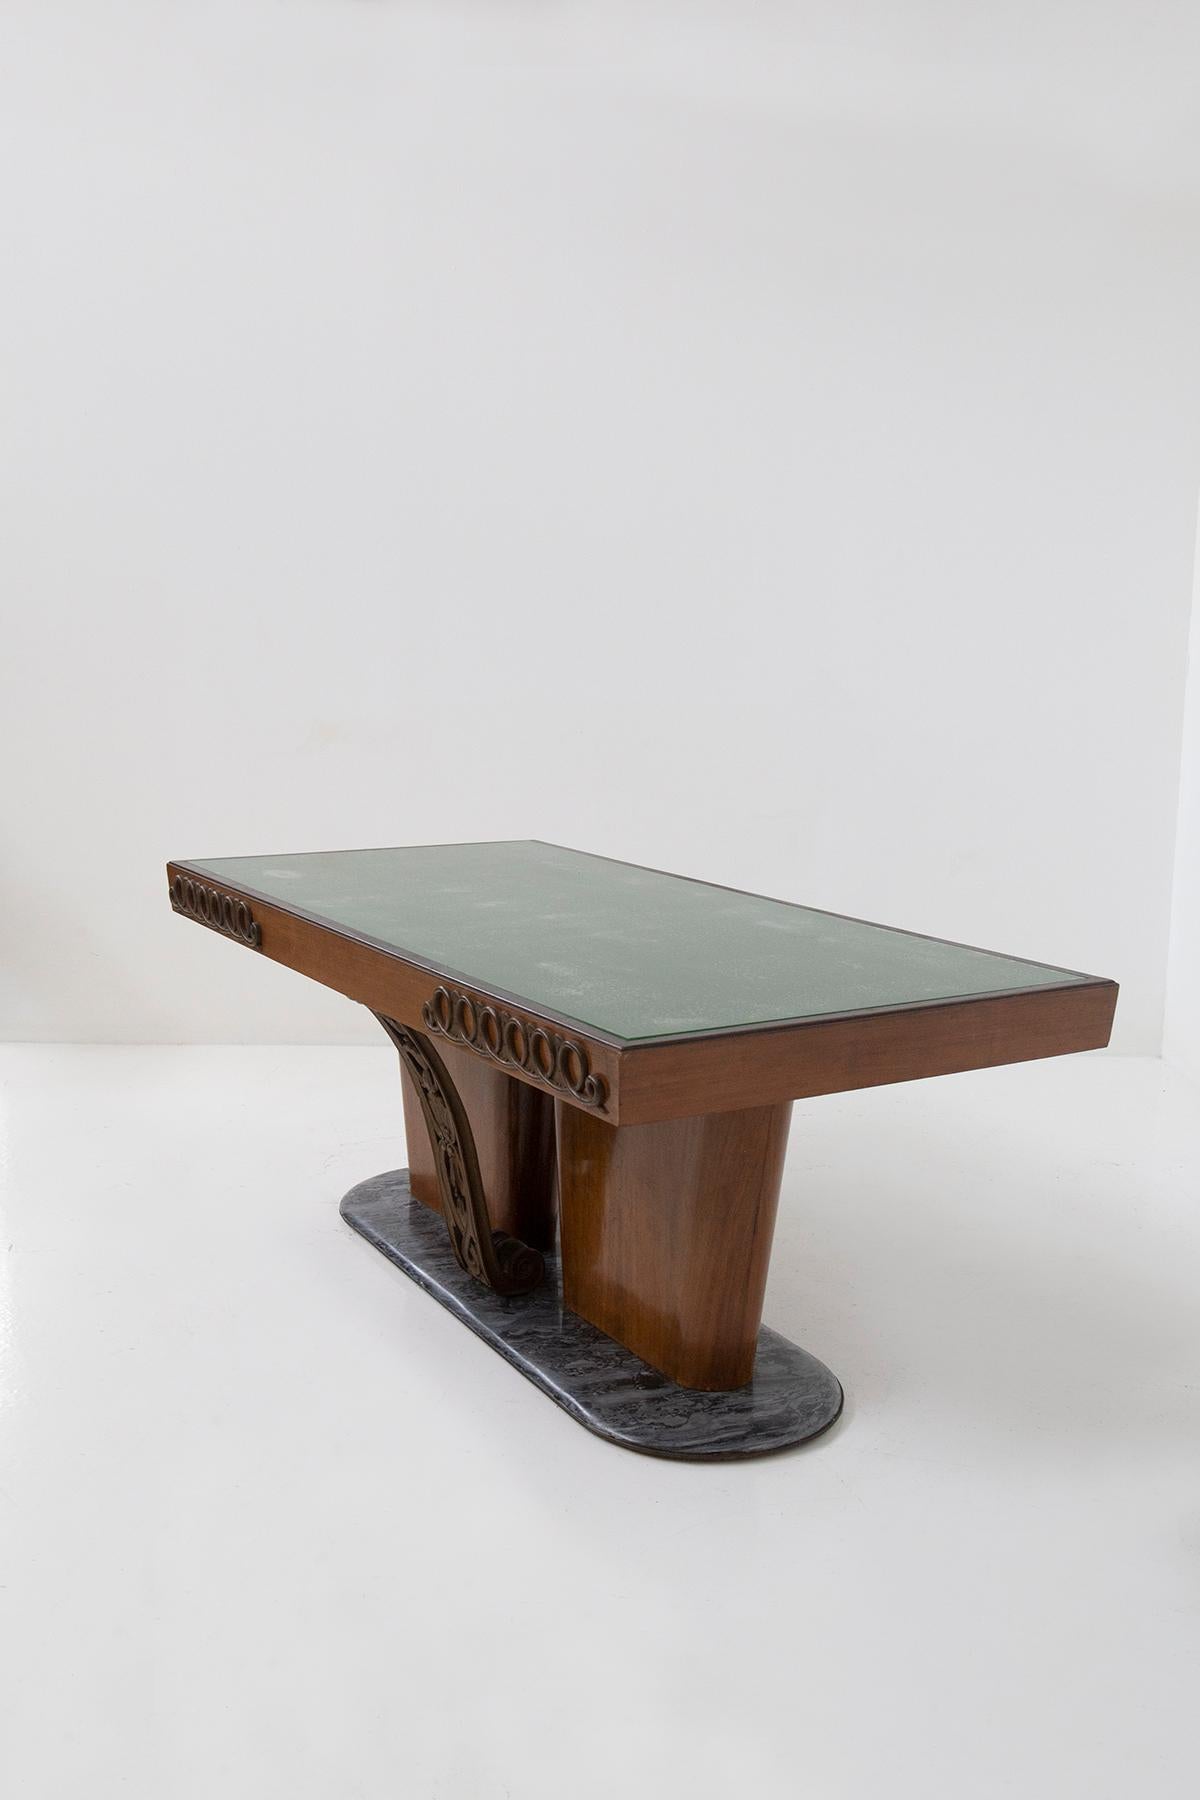 Vintage Italian table with bronzes, wood and marble of great quality For Sale 4